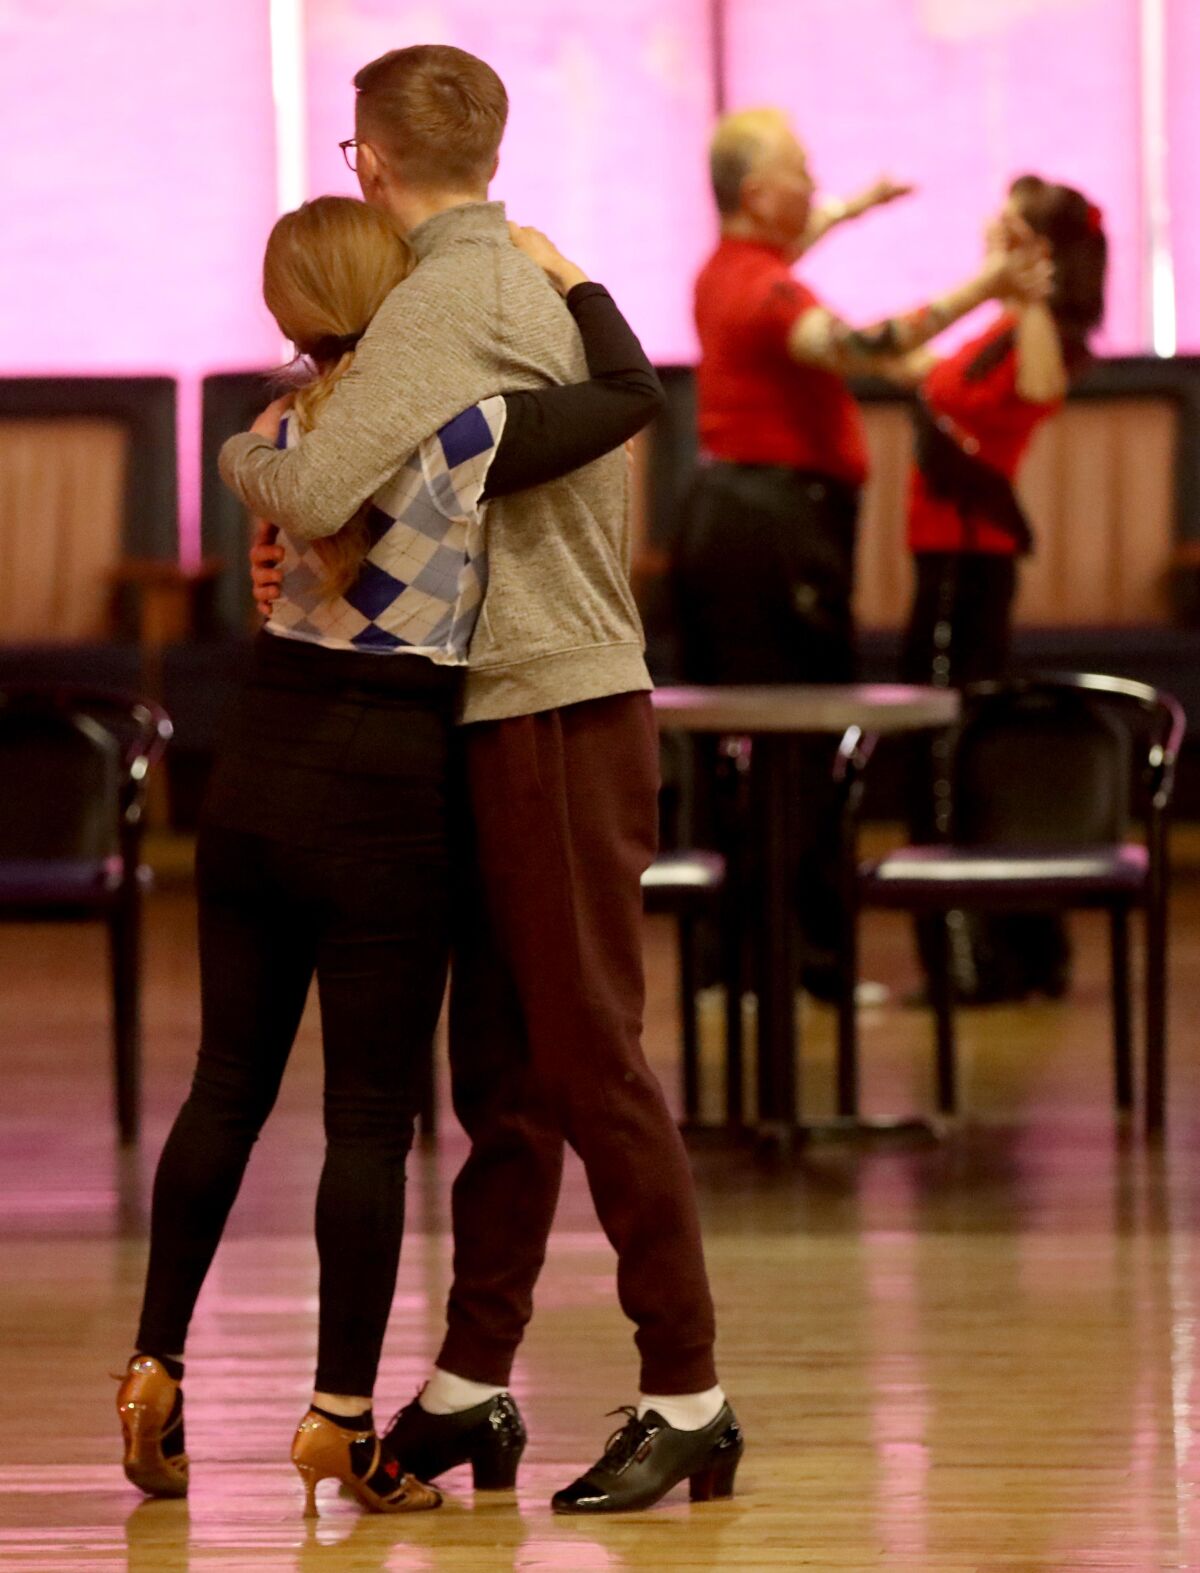 A woman in low heels and a man in dance shoes embrace on a dance floor.